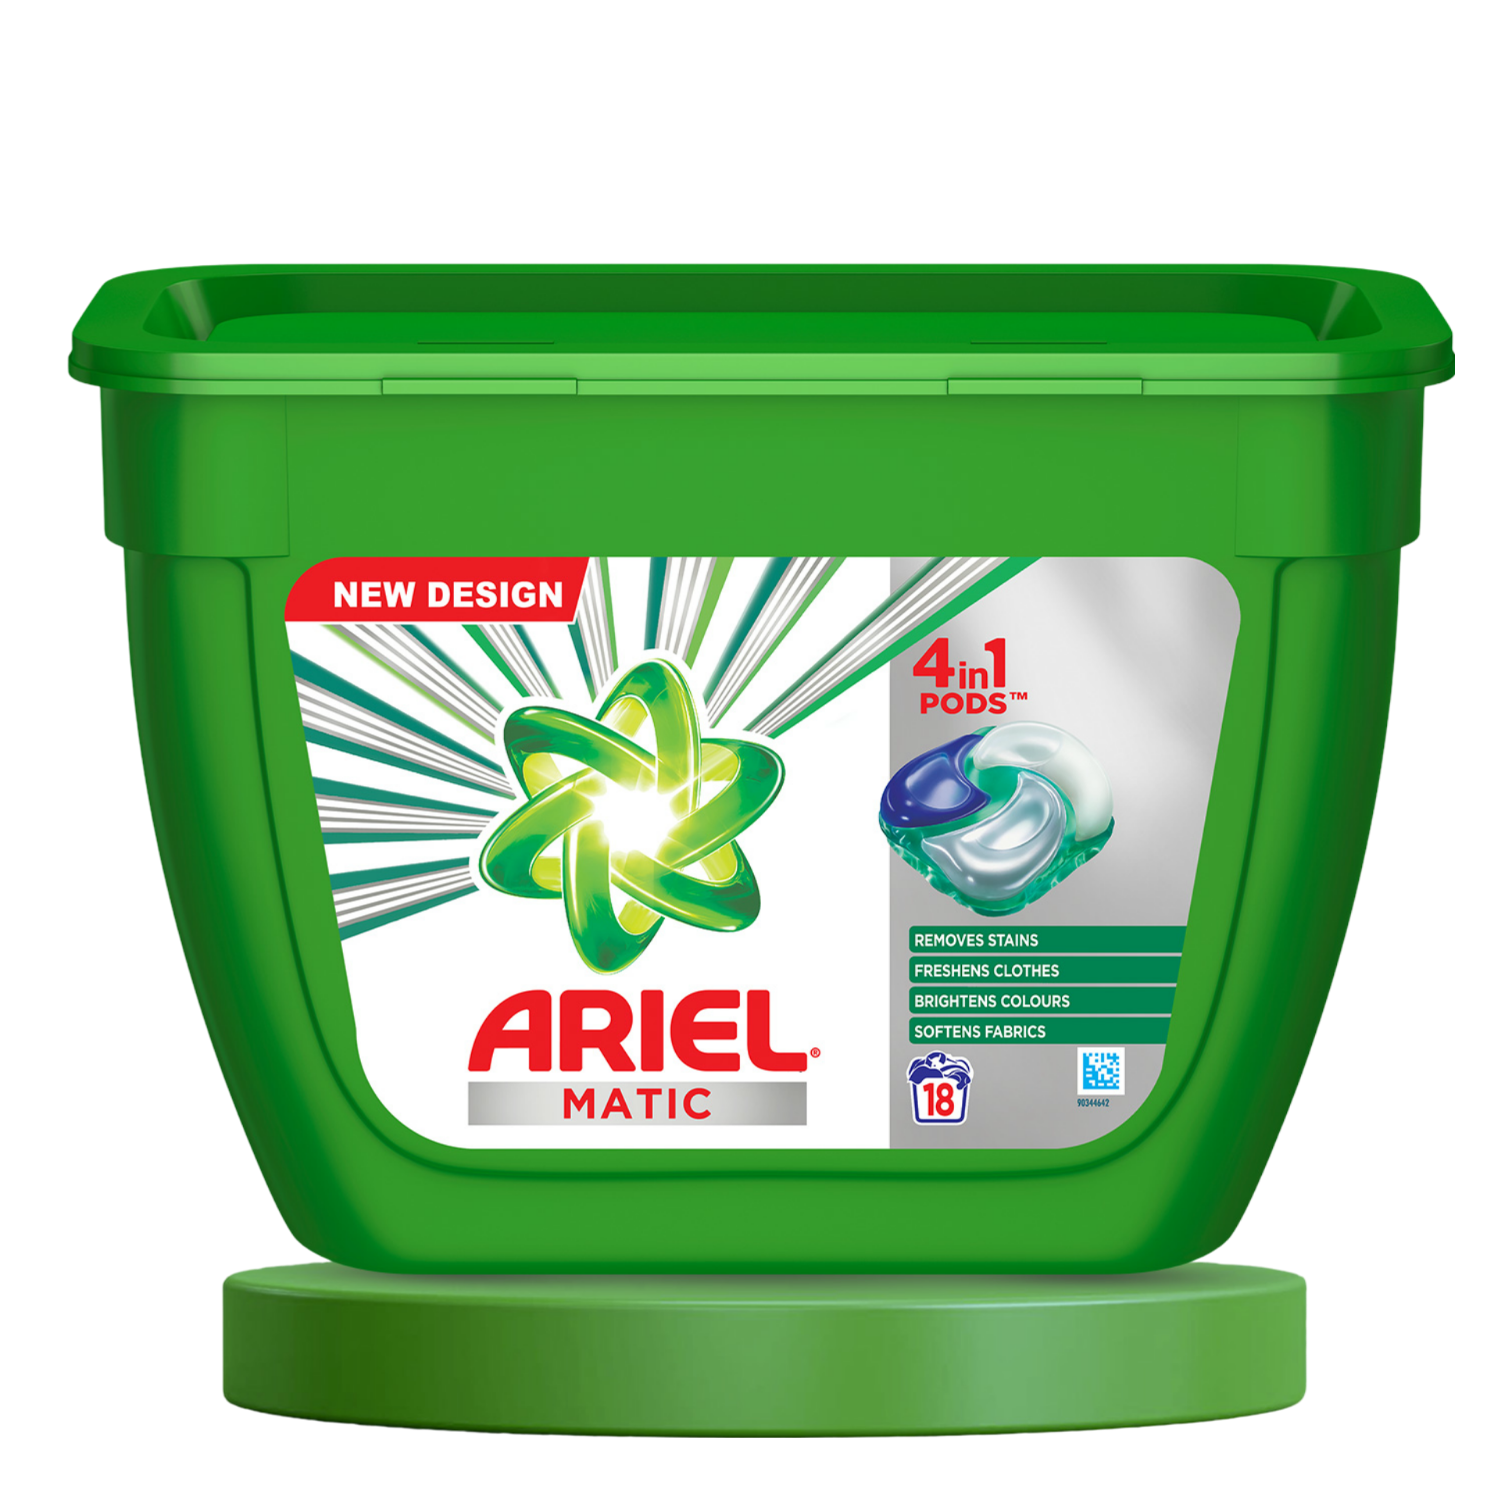 Ariel Matic 4in1 PODs Detergent Pack for Top & Front load washing machine only